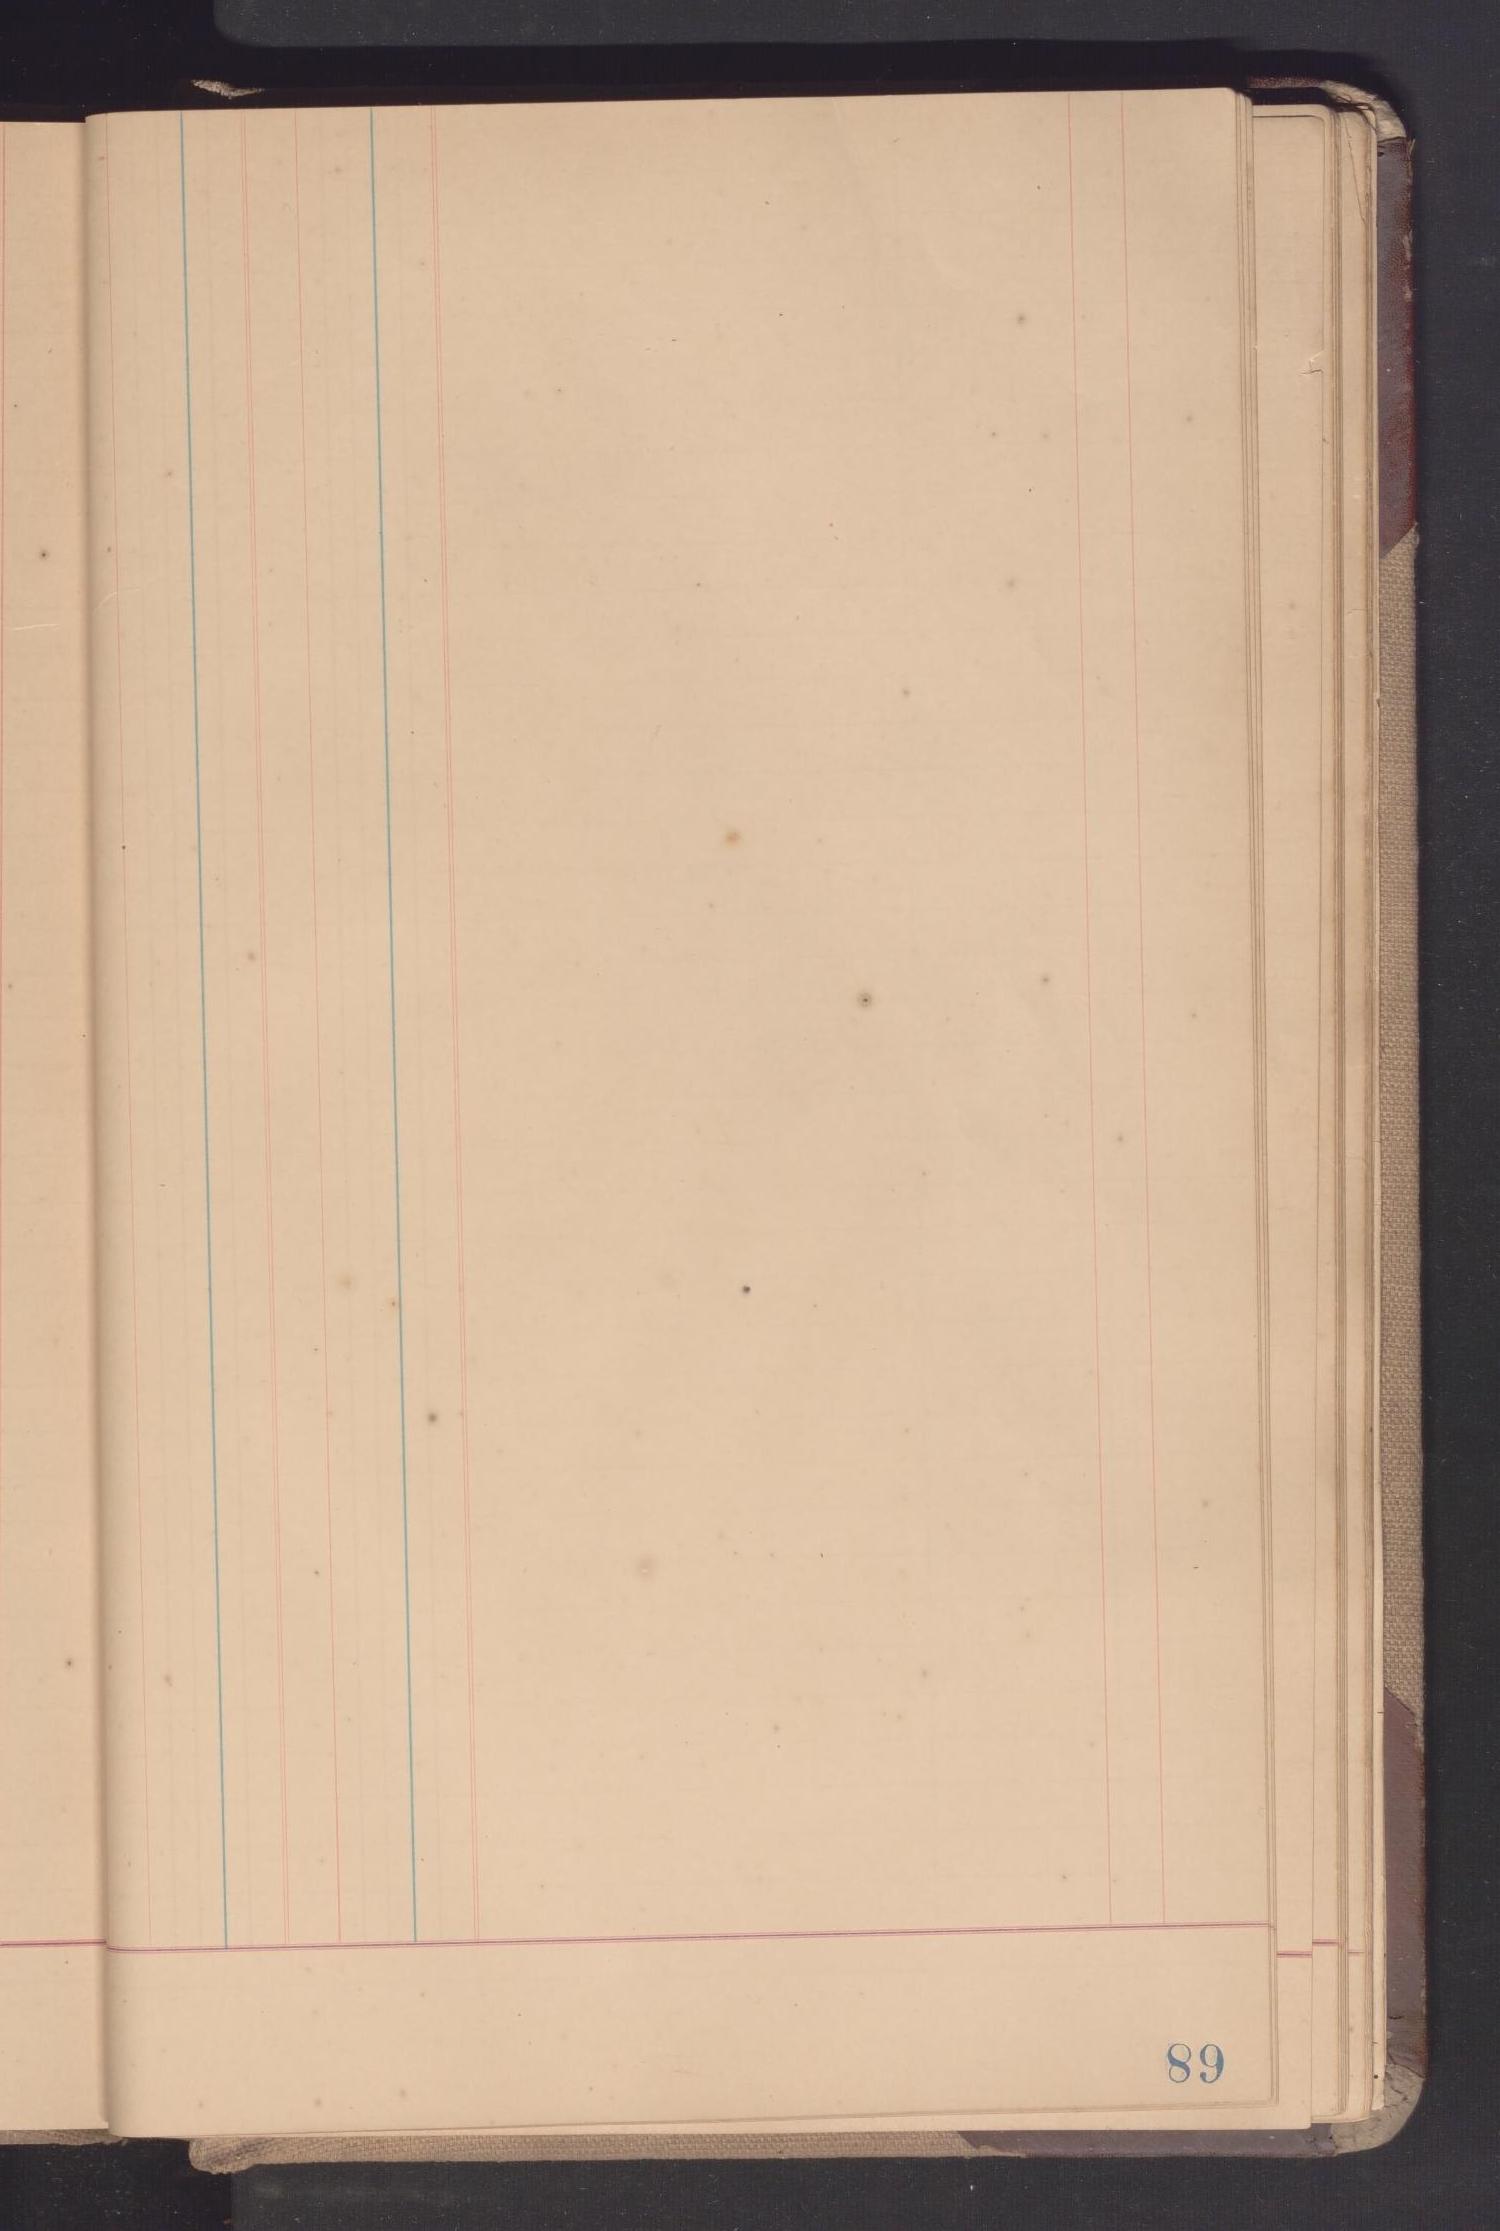 [O'Connor Brothers General Business Ledger: July 1899 - March 1939]
                                                
                                                    68
                                                